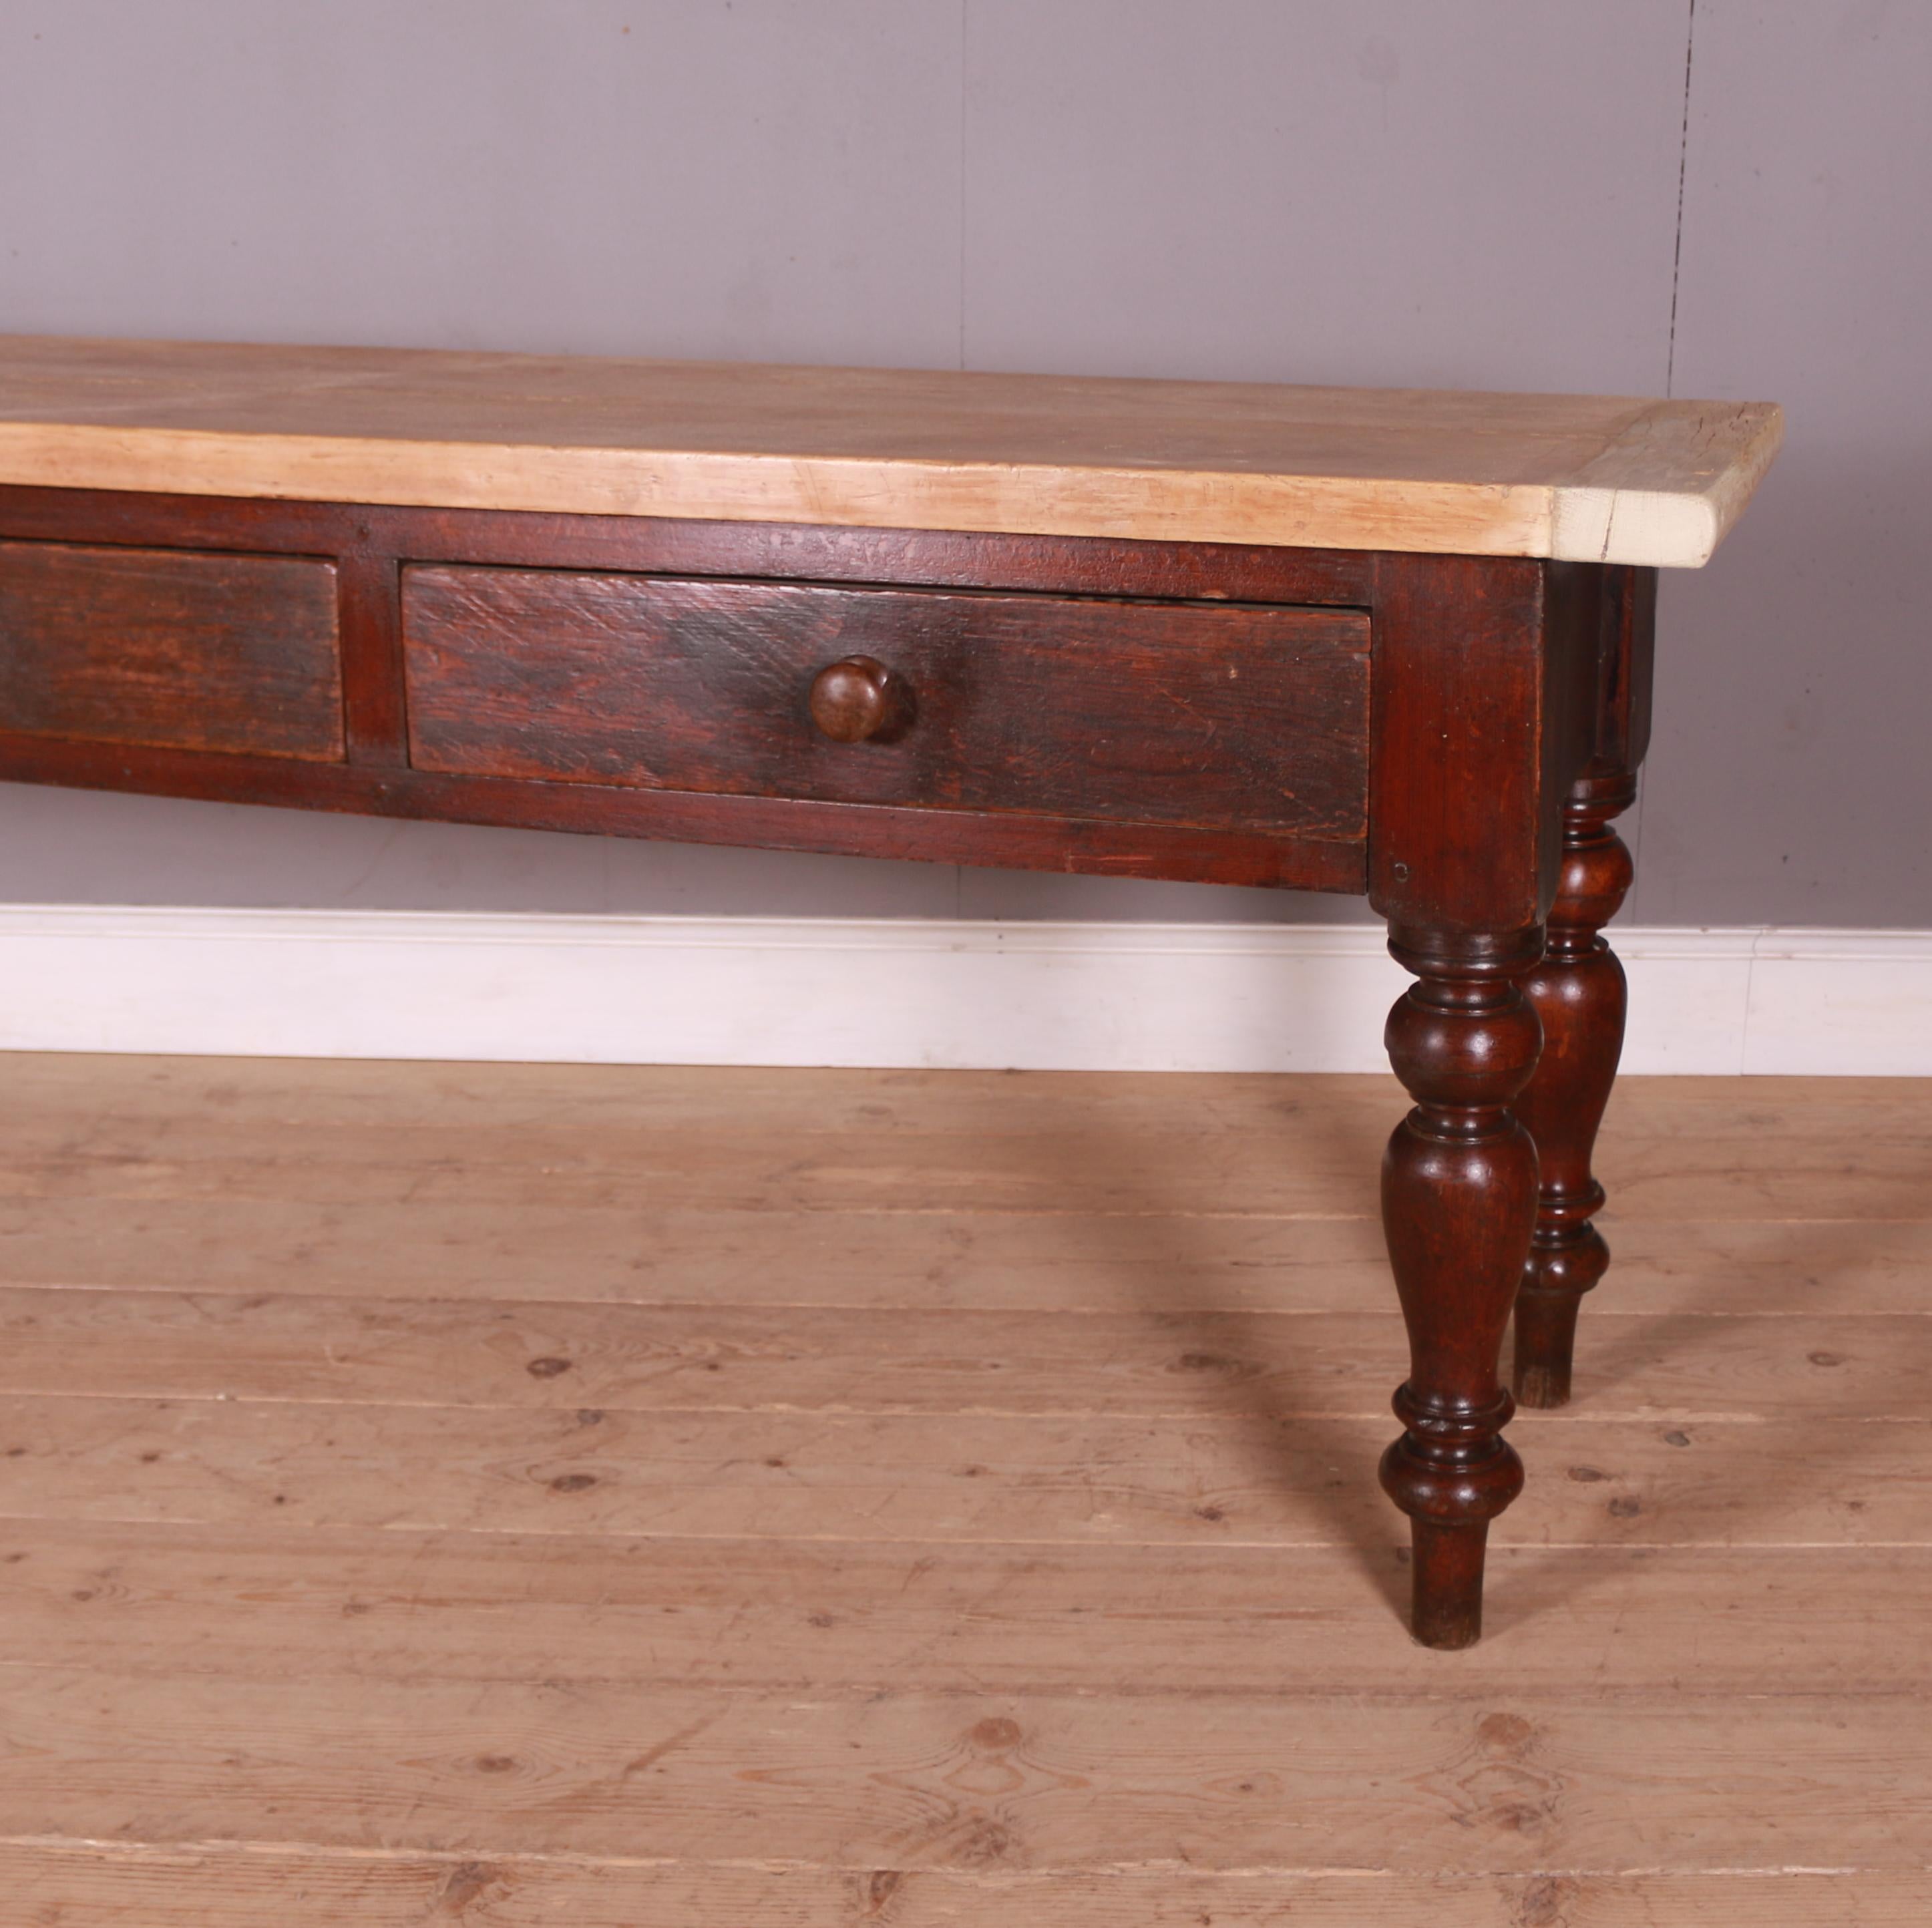 Huge 19th C English sycamore topped 3 drawer dairy dresser. 1850.

2